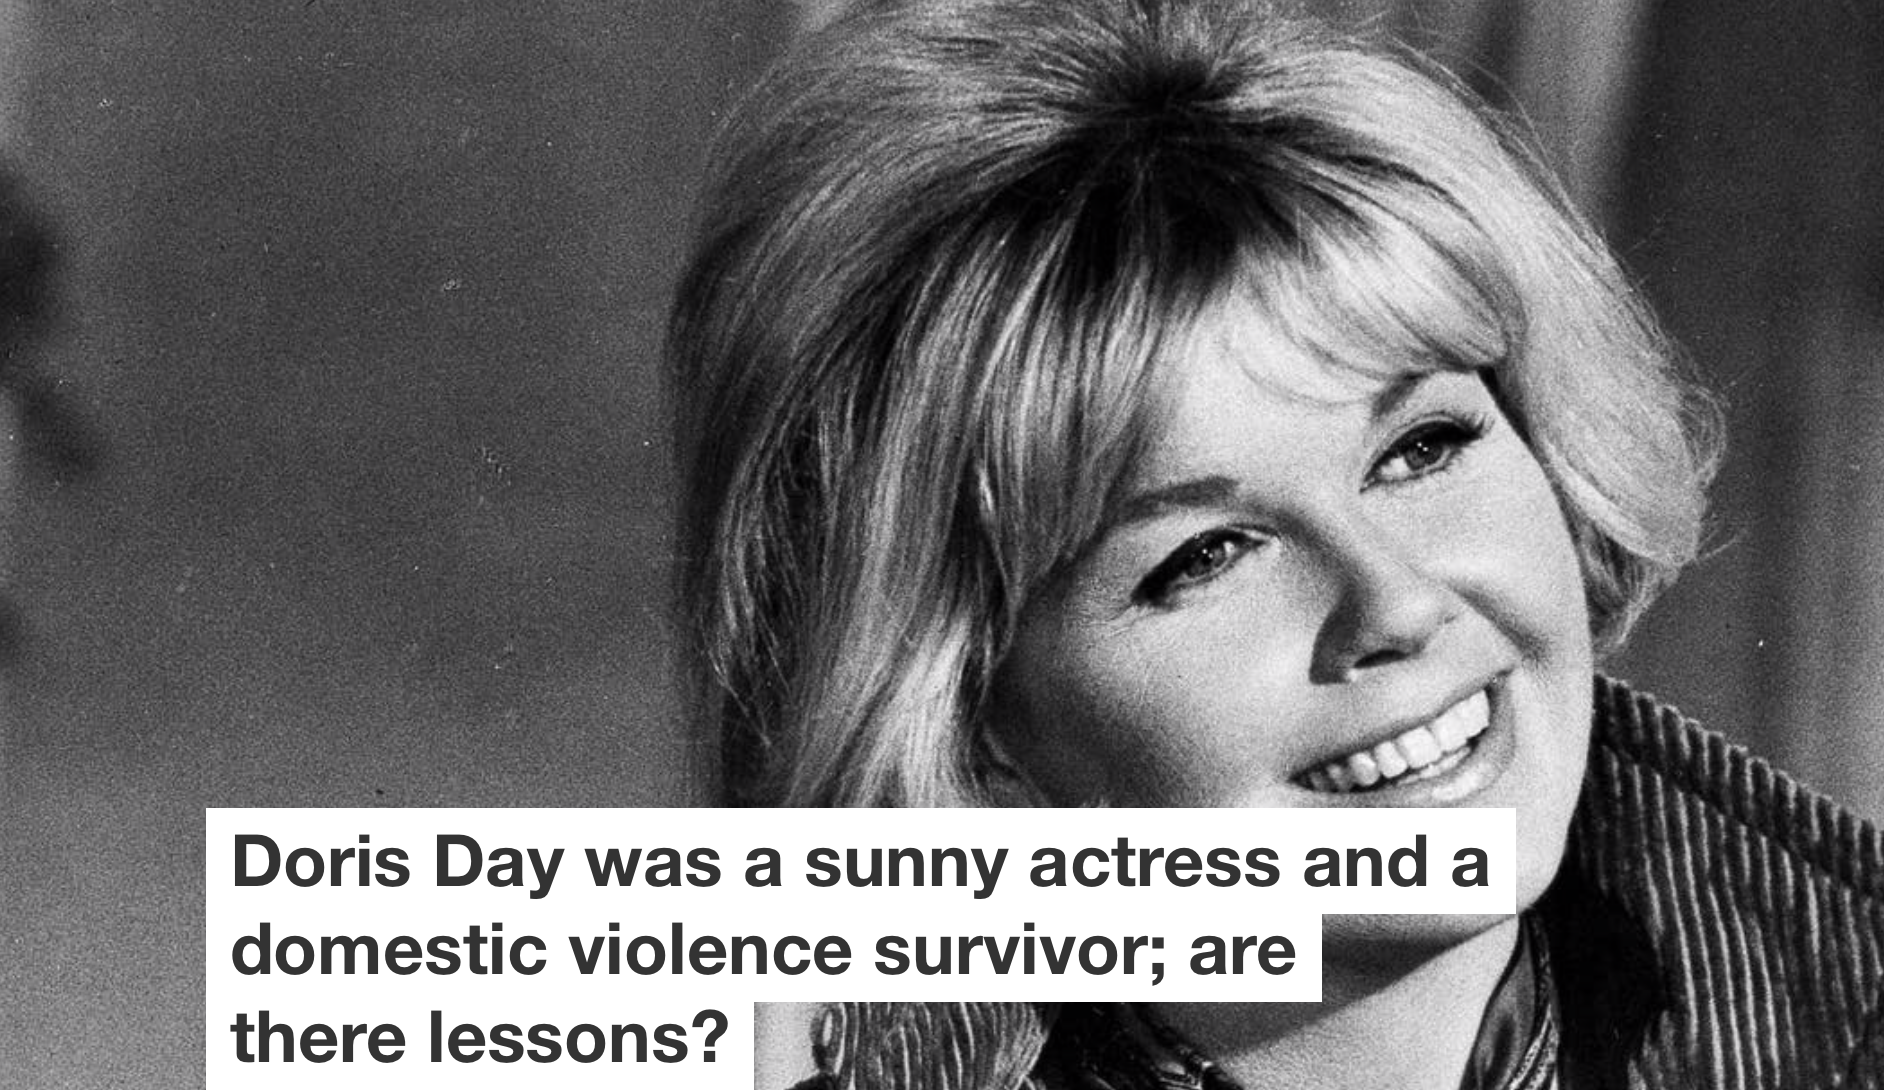 Doris Day was a sunny actress and a domestic violence survivor; are there lessons?